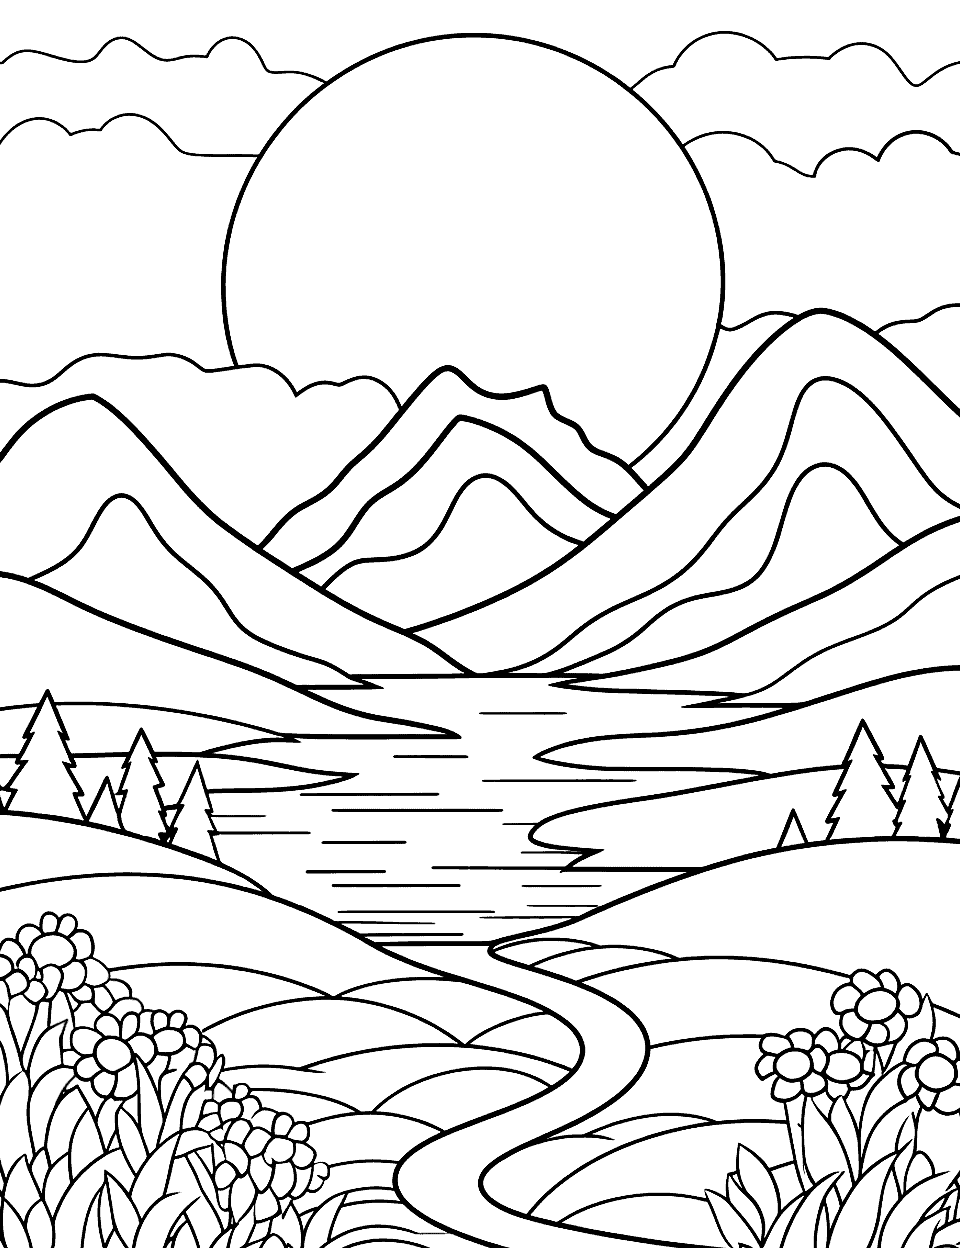 Majestic Mountain View Coloring Page - A serene mountain landscape with a rising sun in the background.